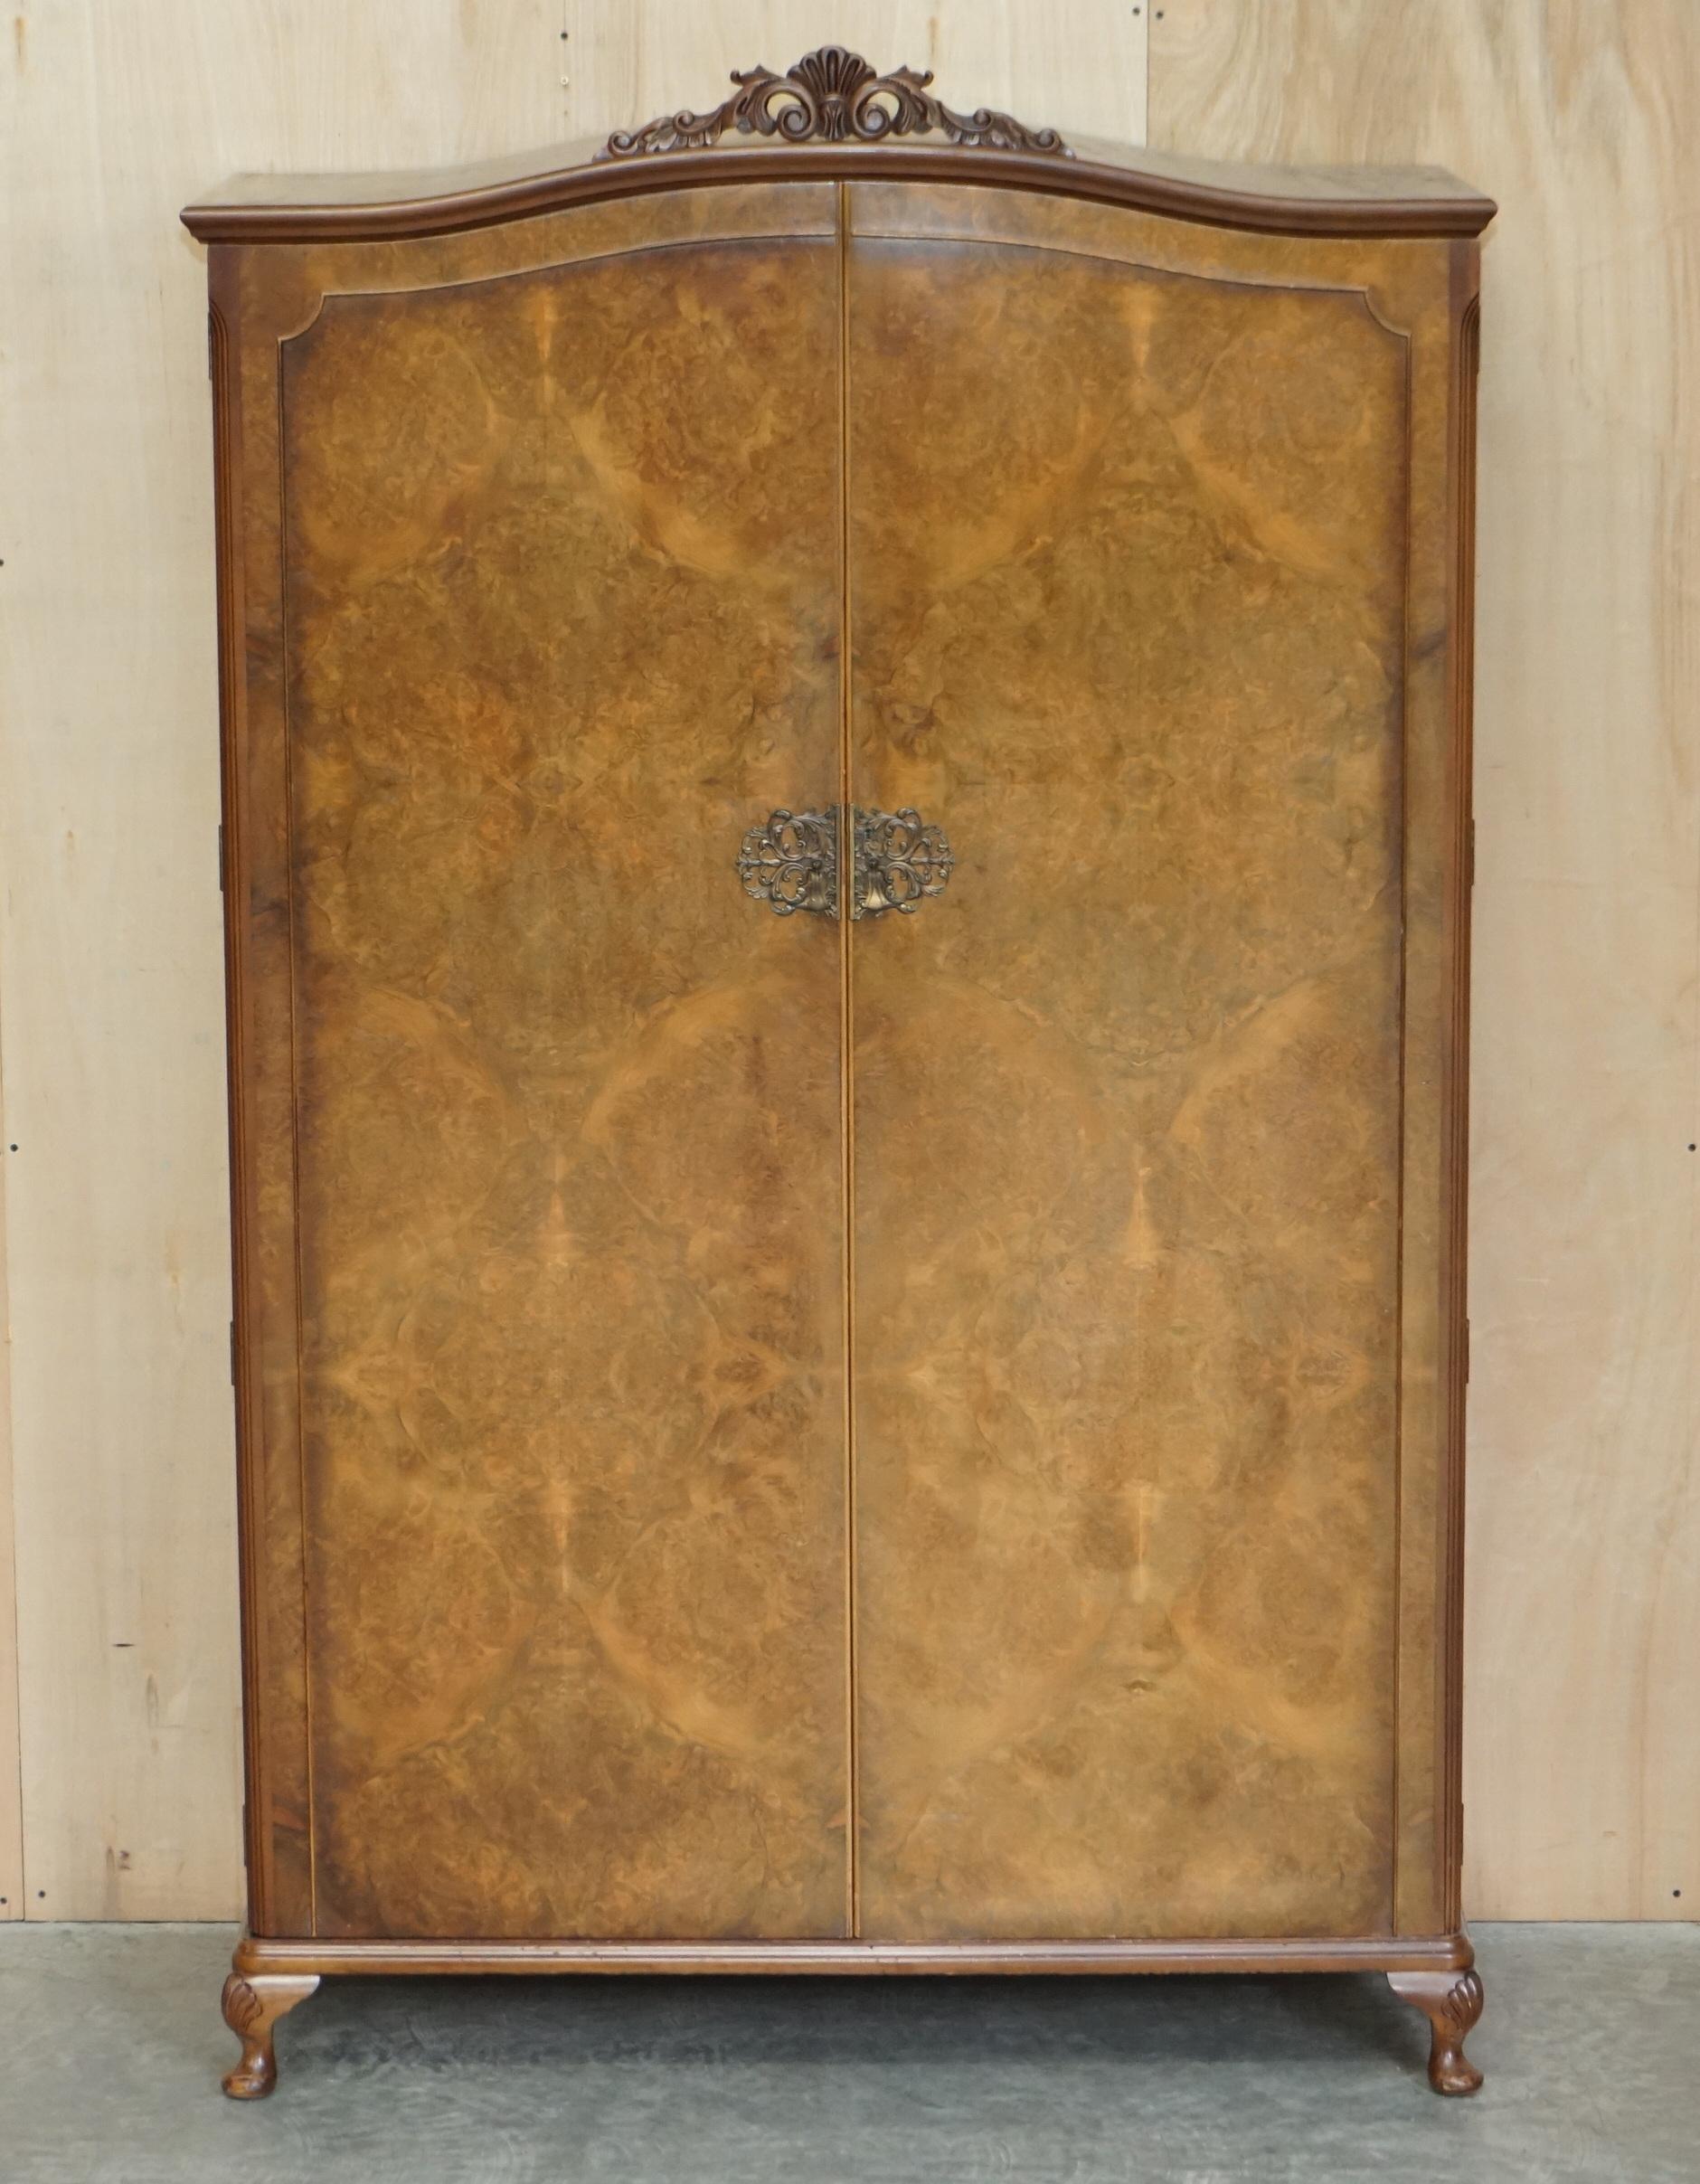 Royal House Antiques

Royal House Antiques is delighted to offer for sale this stunning, original circa 1940’s Art Deco large Wardrobe which is part of a suite

Please note the delivery fee listed is just a guide, it covers within the M25 only for